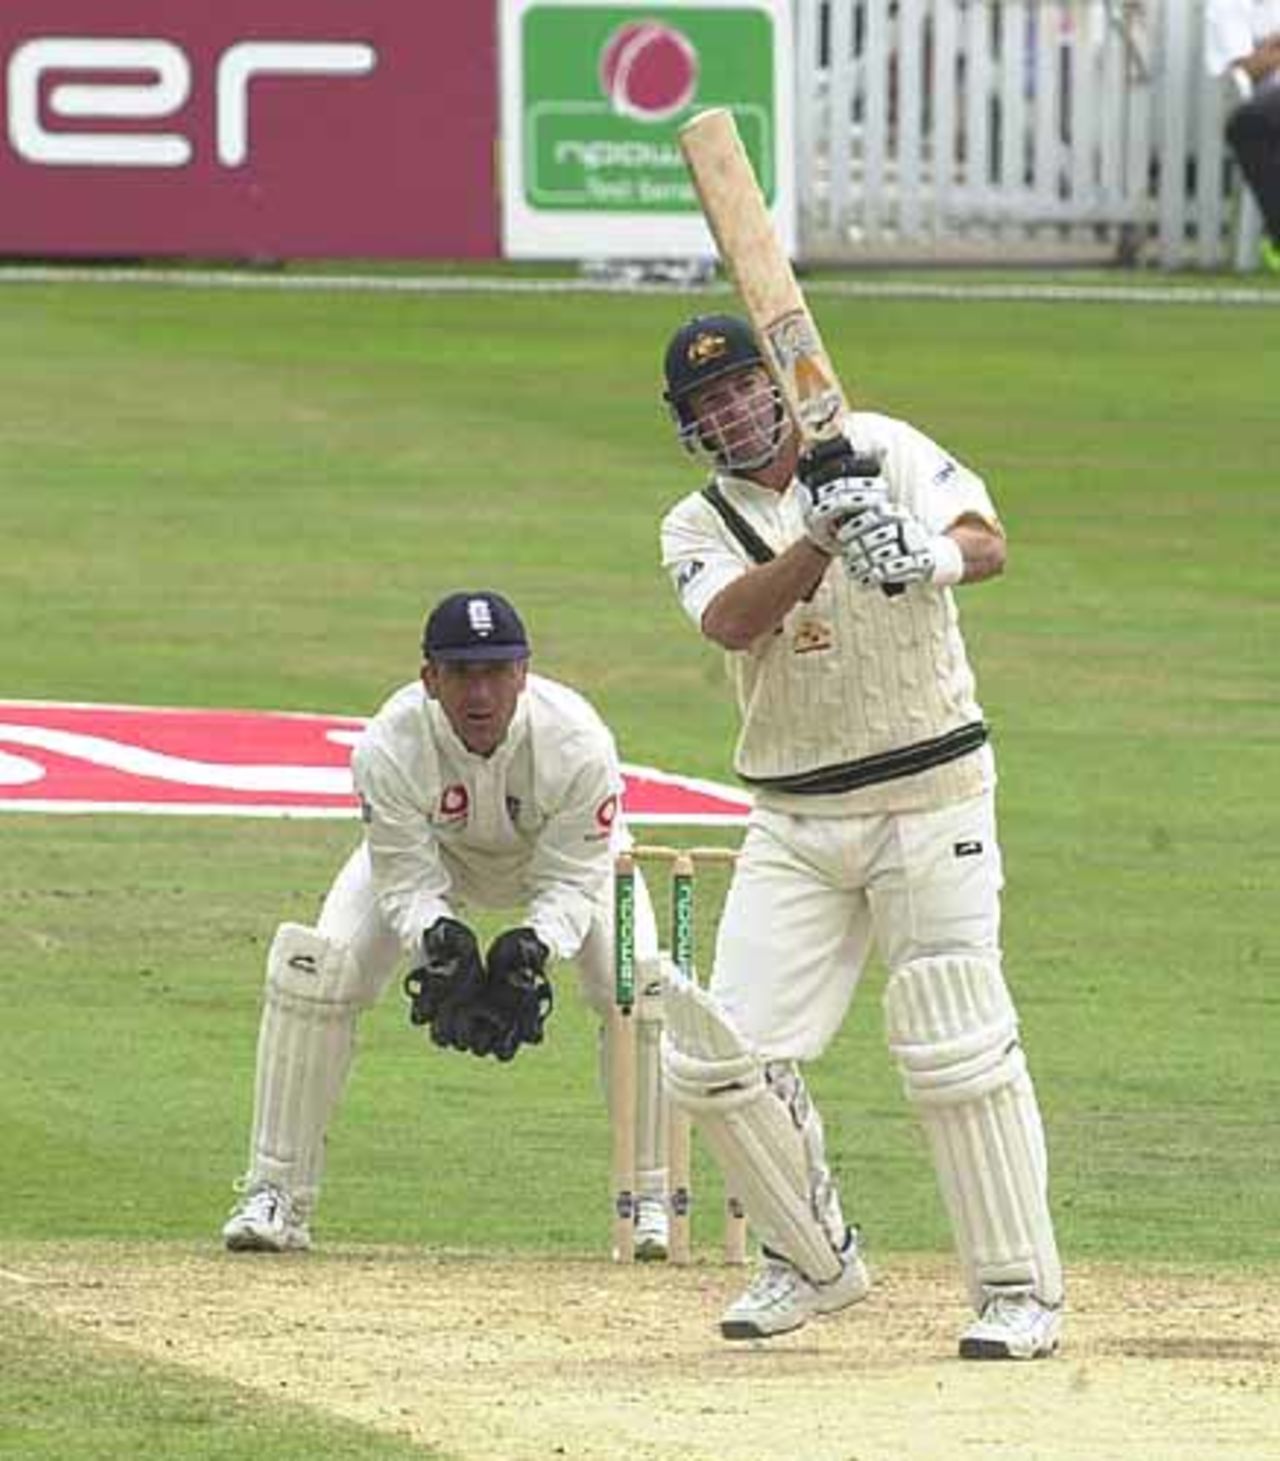 Mark Waugh hits Croft for four in the second innings of Australia, The Ashes 3rd npower Test, Nottingham, 02-06 Aug 2001